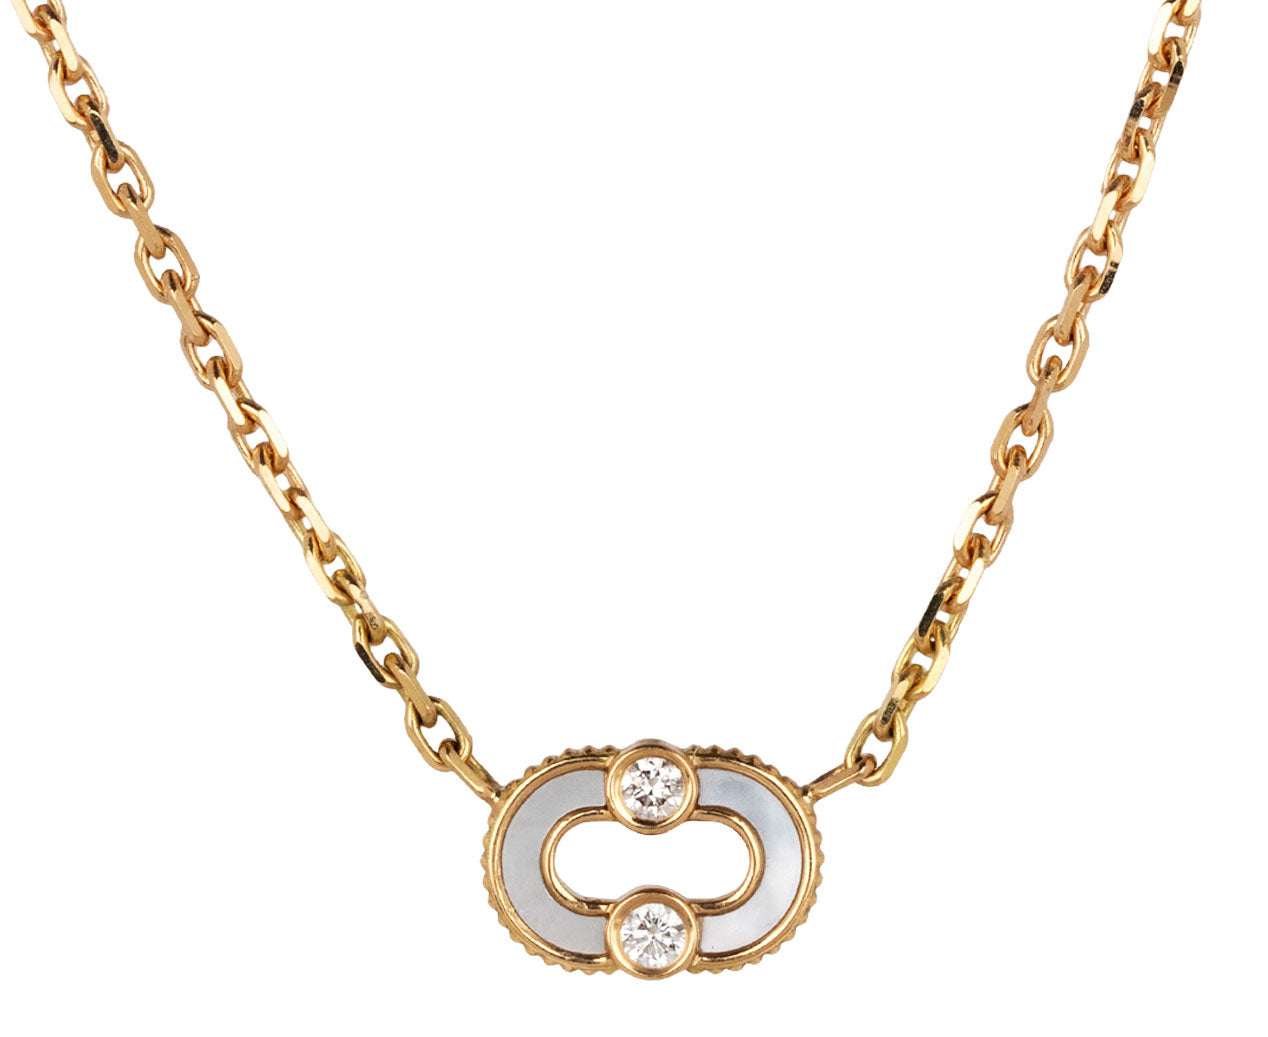 LOUIS VUITTON 18K Yellow Gold Tiger's Eye Blossom Pendant Necklace